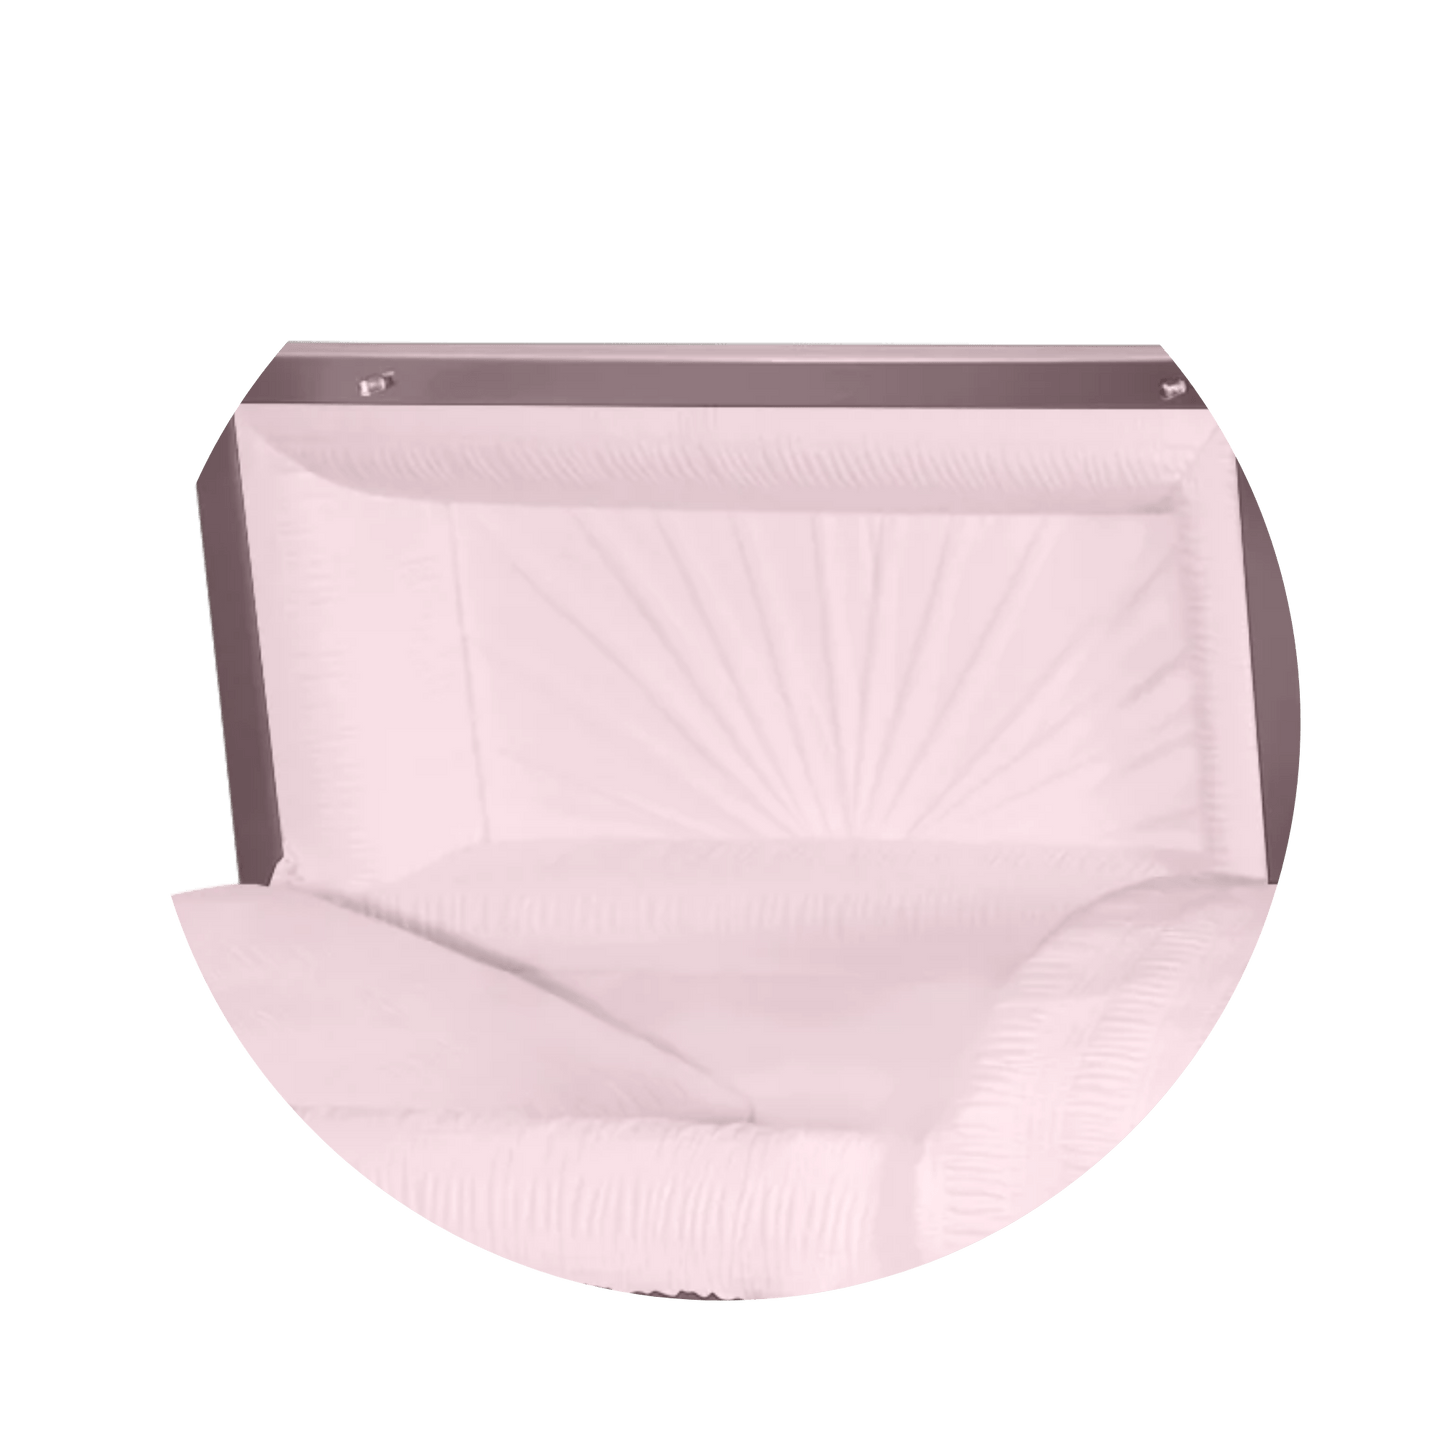 Reflections XL | Orchid Steel Oversize Casket with Pink Interior